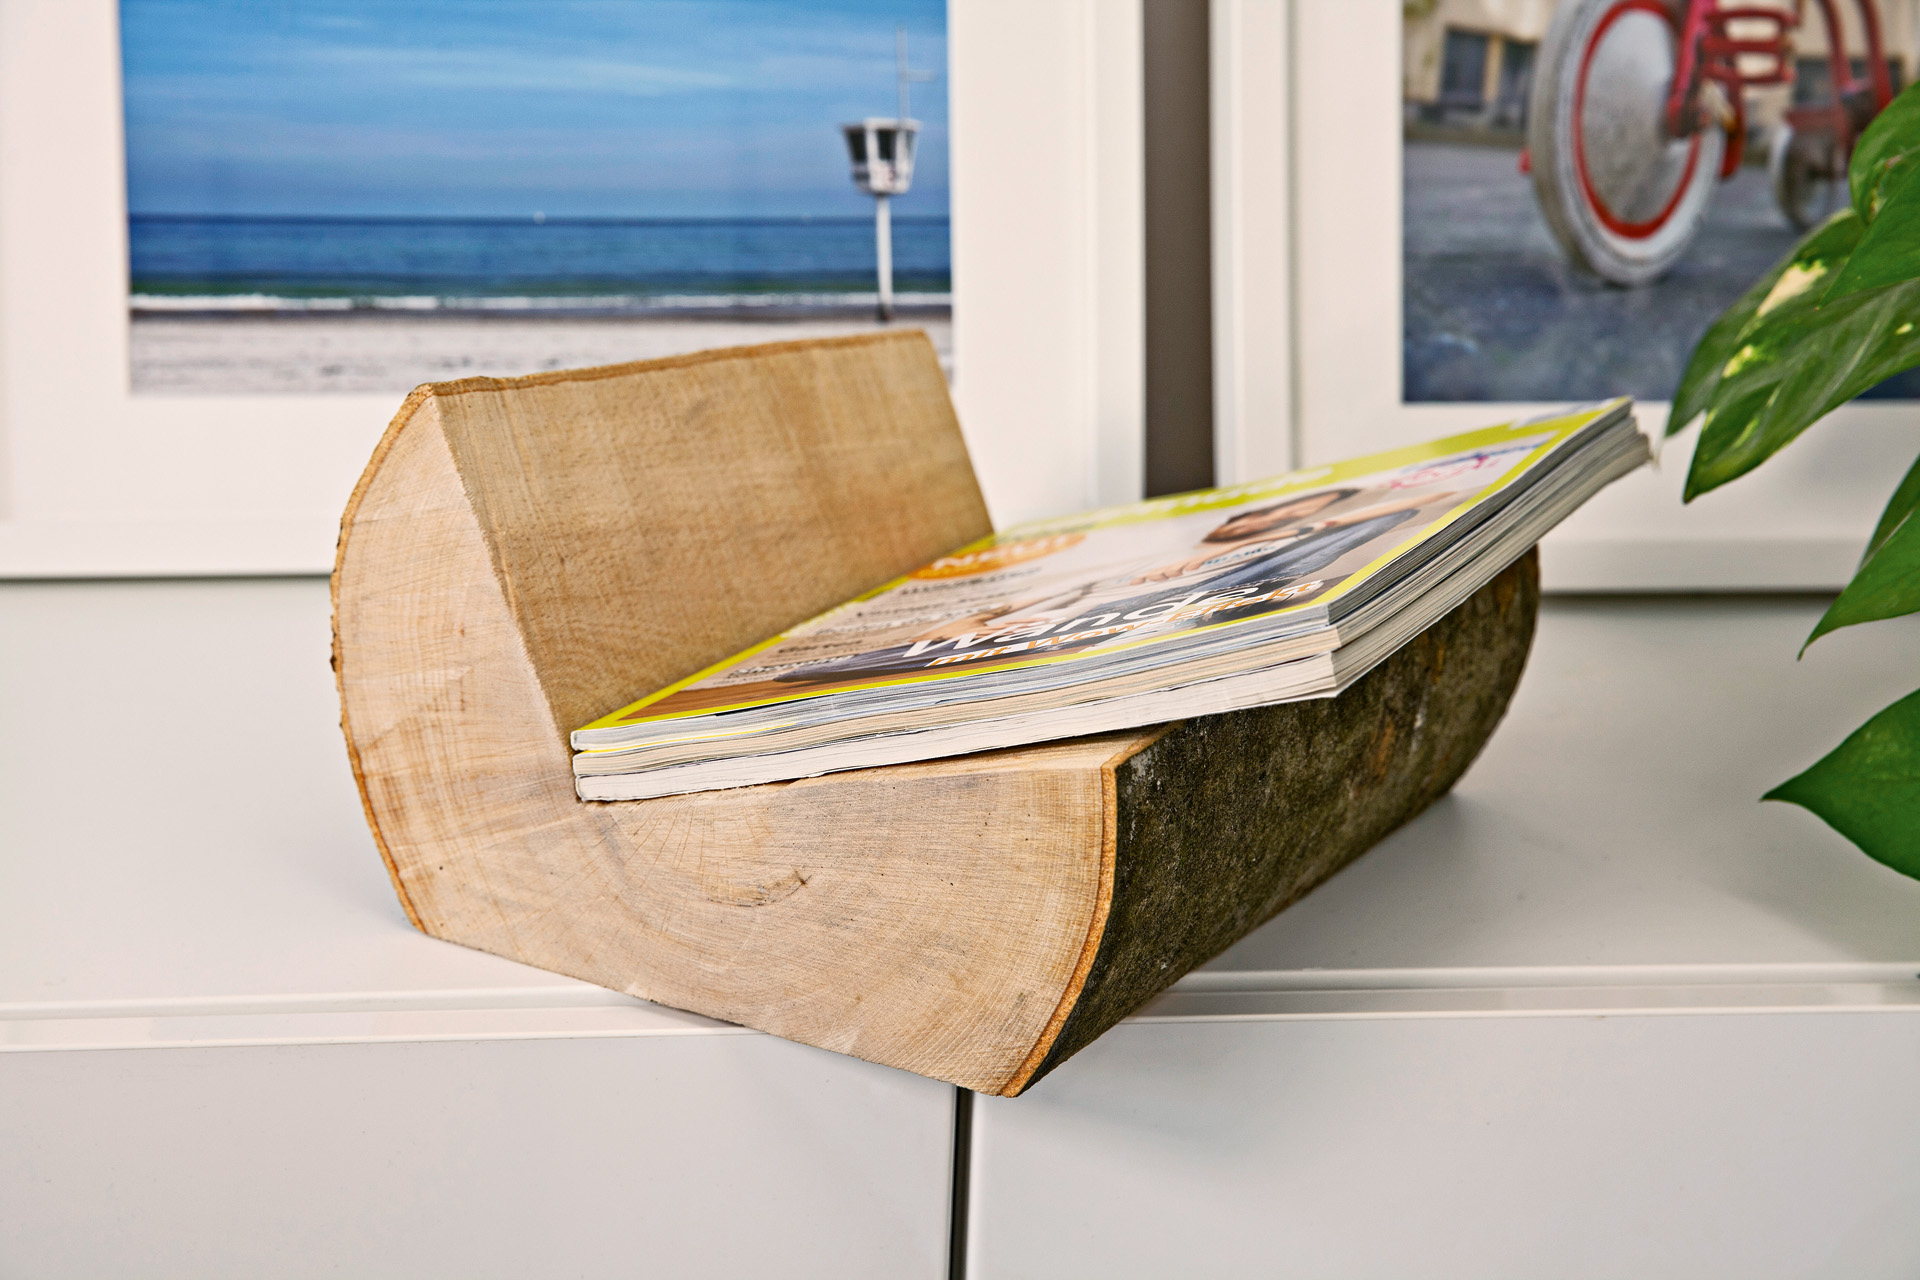 Magazines in a DIY magazine holder made from a log